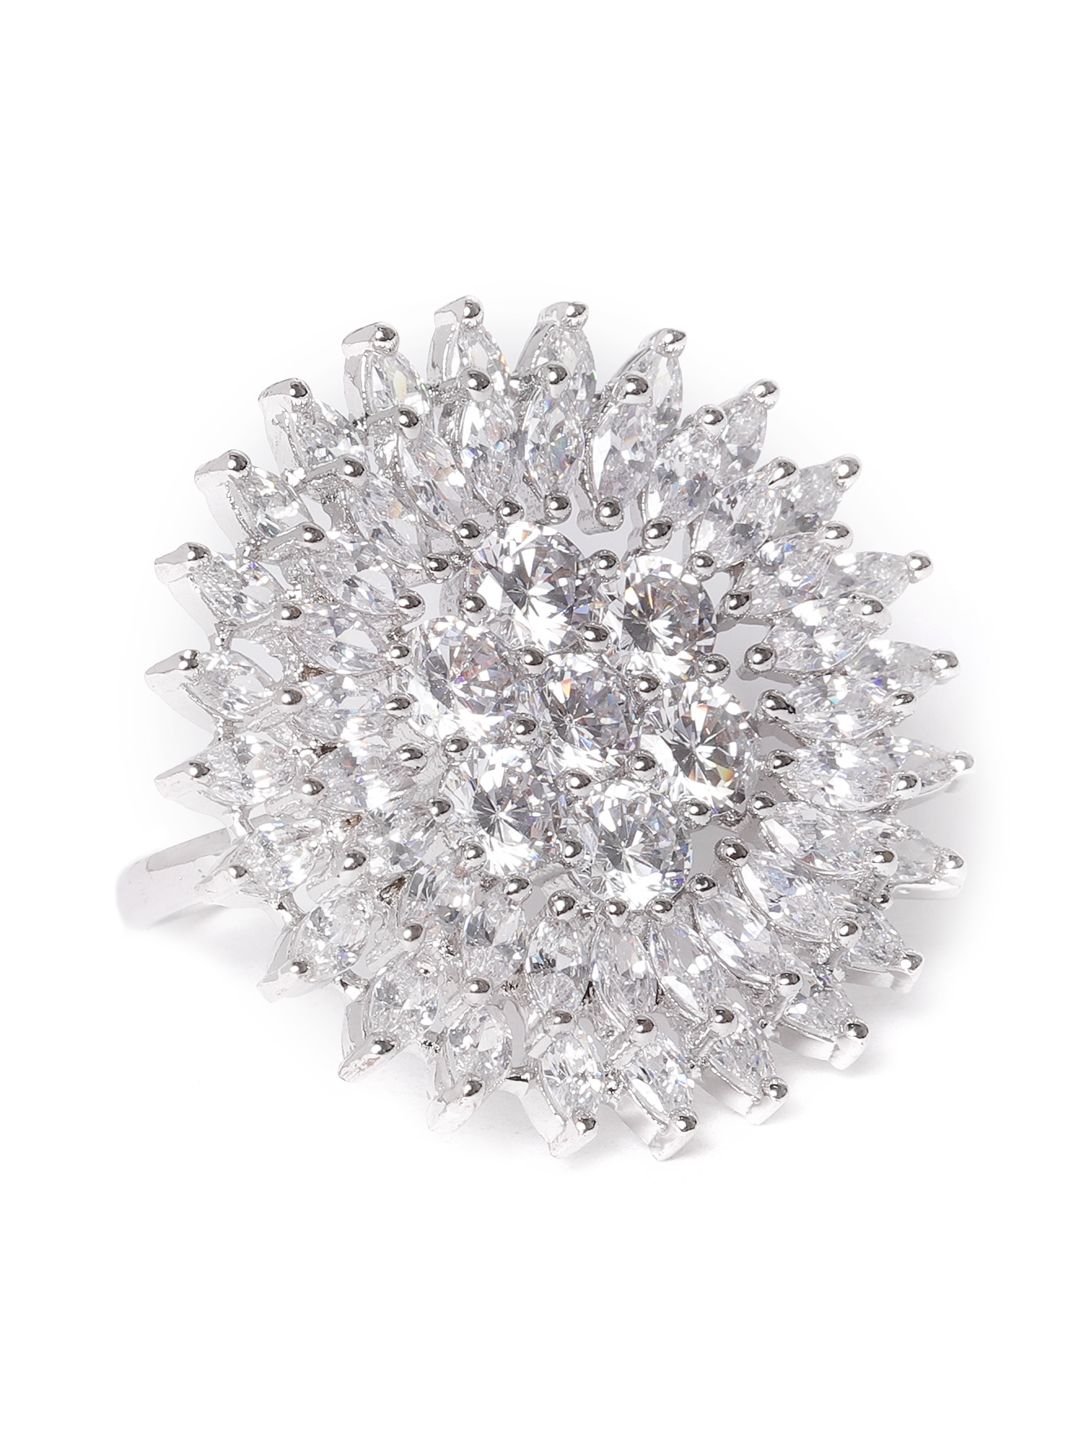 JEWELS GEHNA Silver-Plated AD-Studded Handcrafted Adjustable Circular Ring Price in India